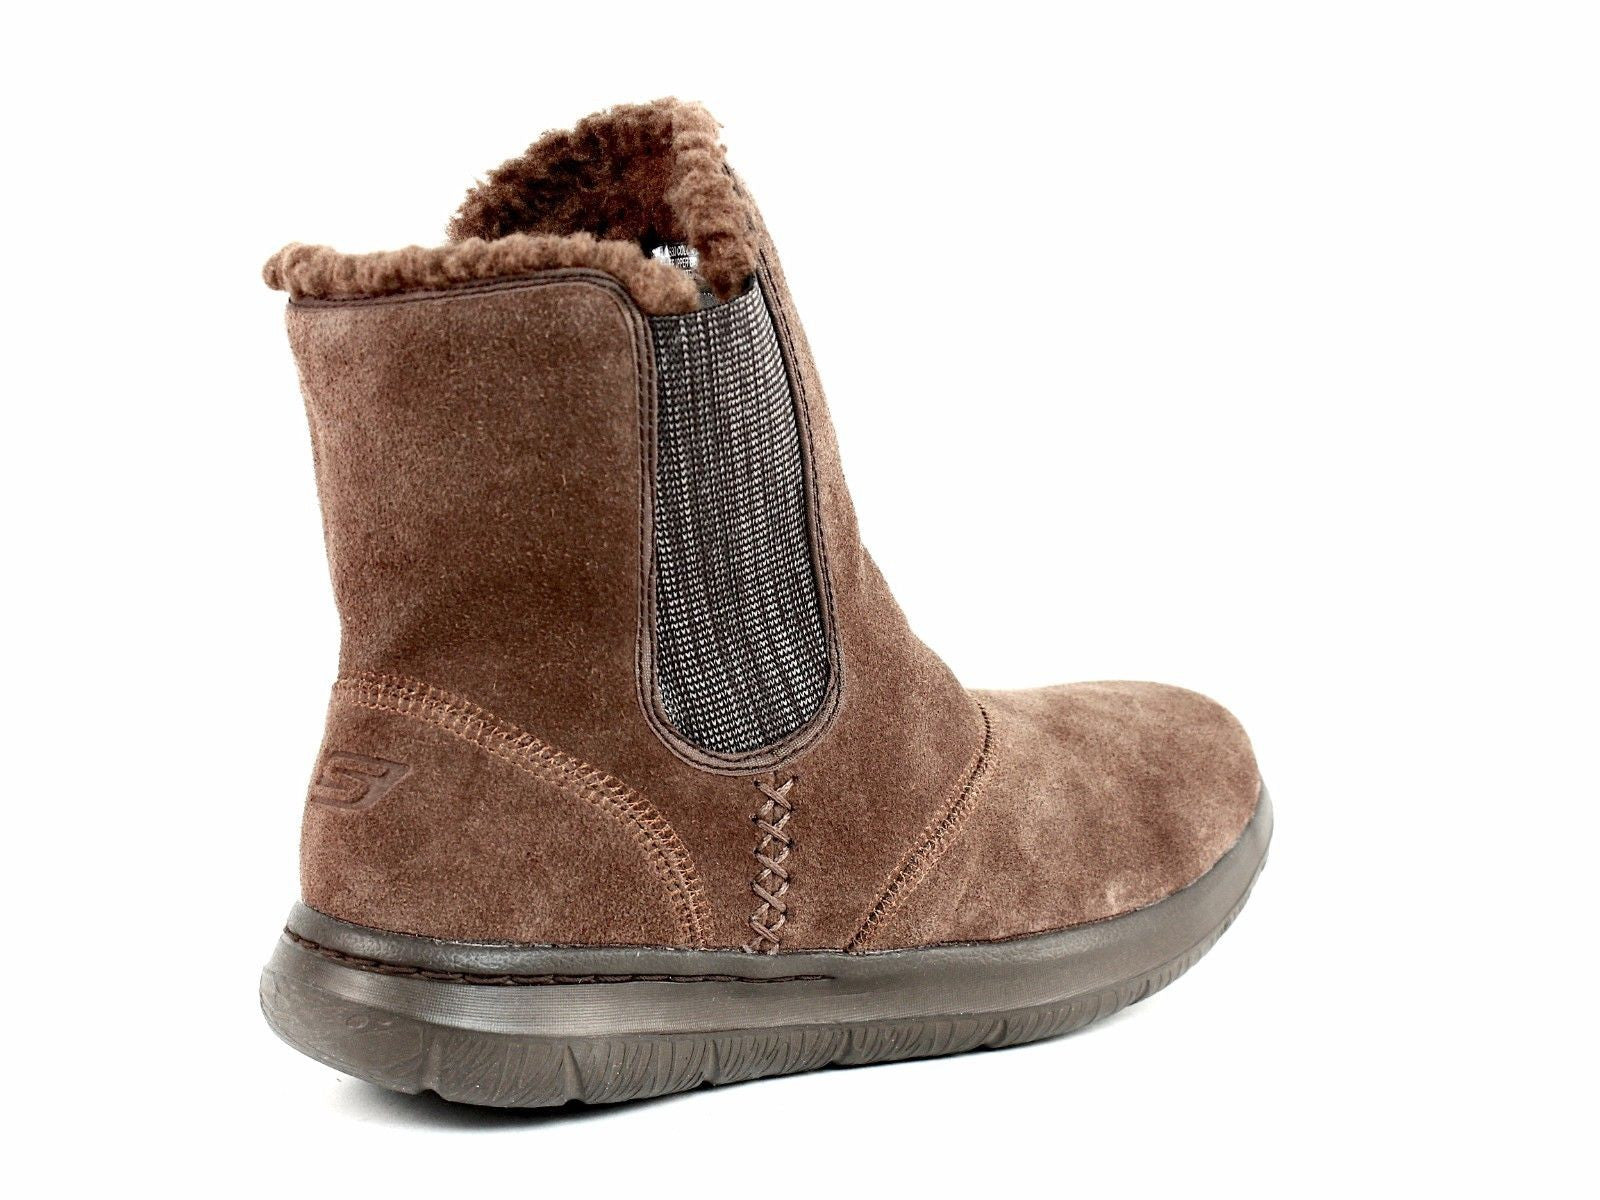 Women's WALK CITY Casual Ankle Winter Warm Brown Boo – ShoeVariety.com